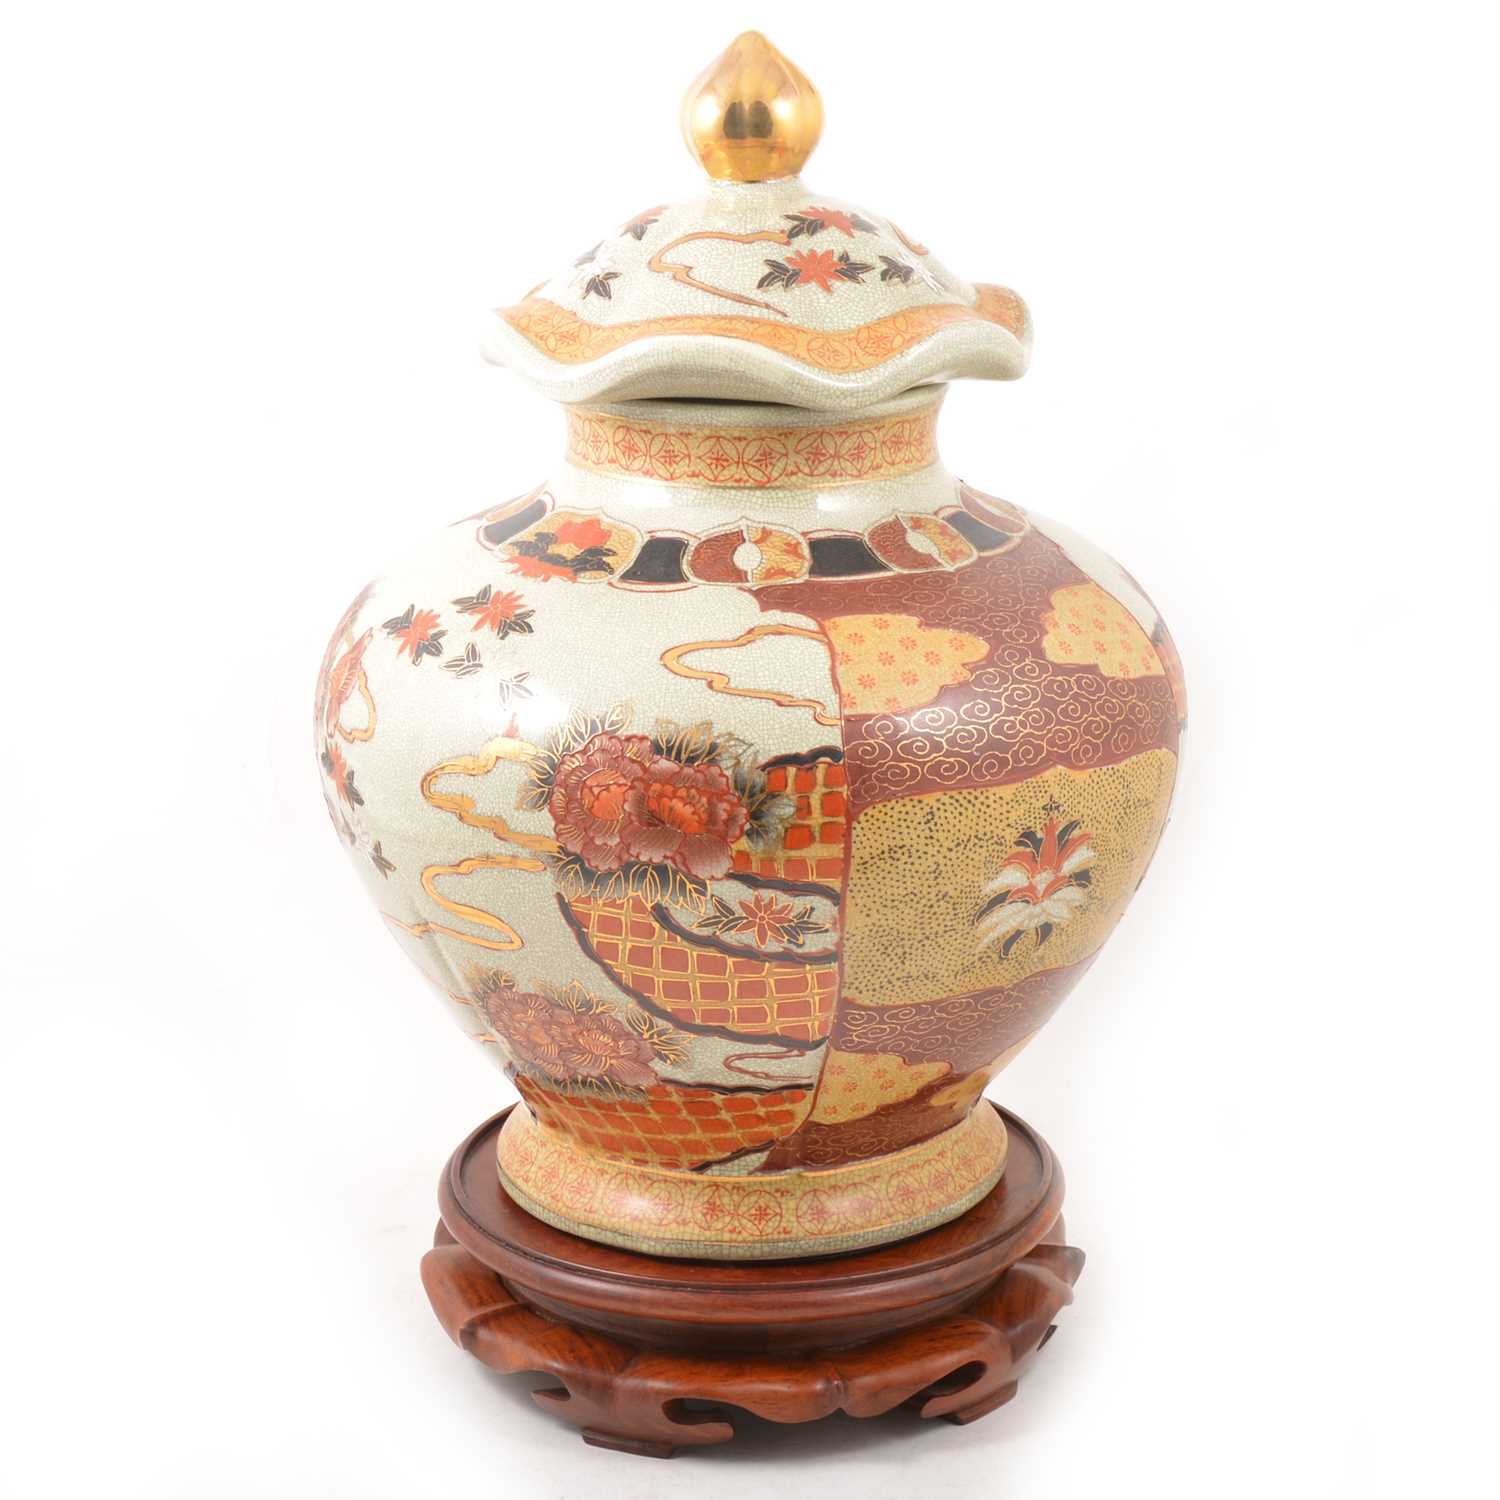 Lot 36 - A large Oriental covered storage jar.